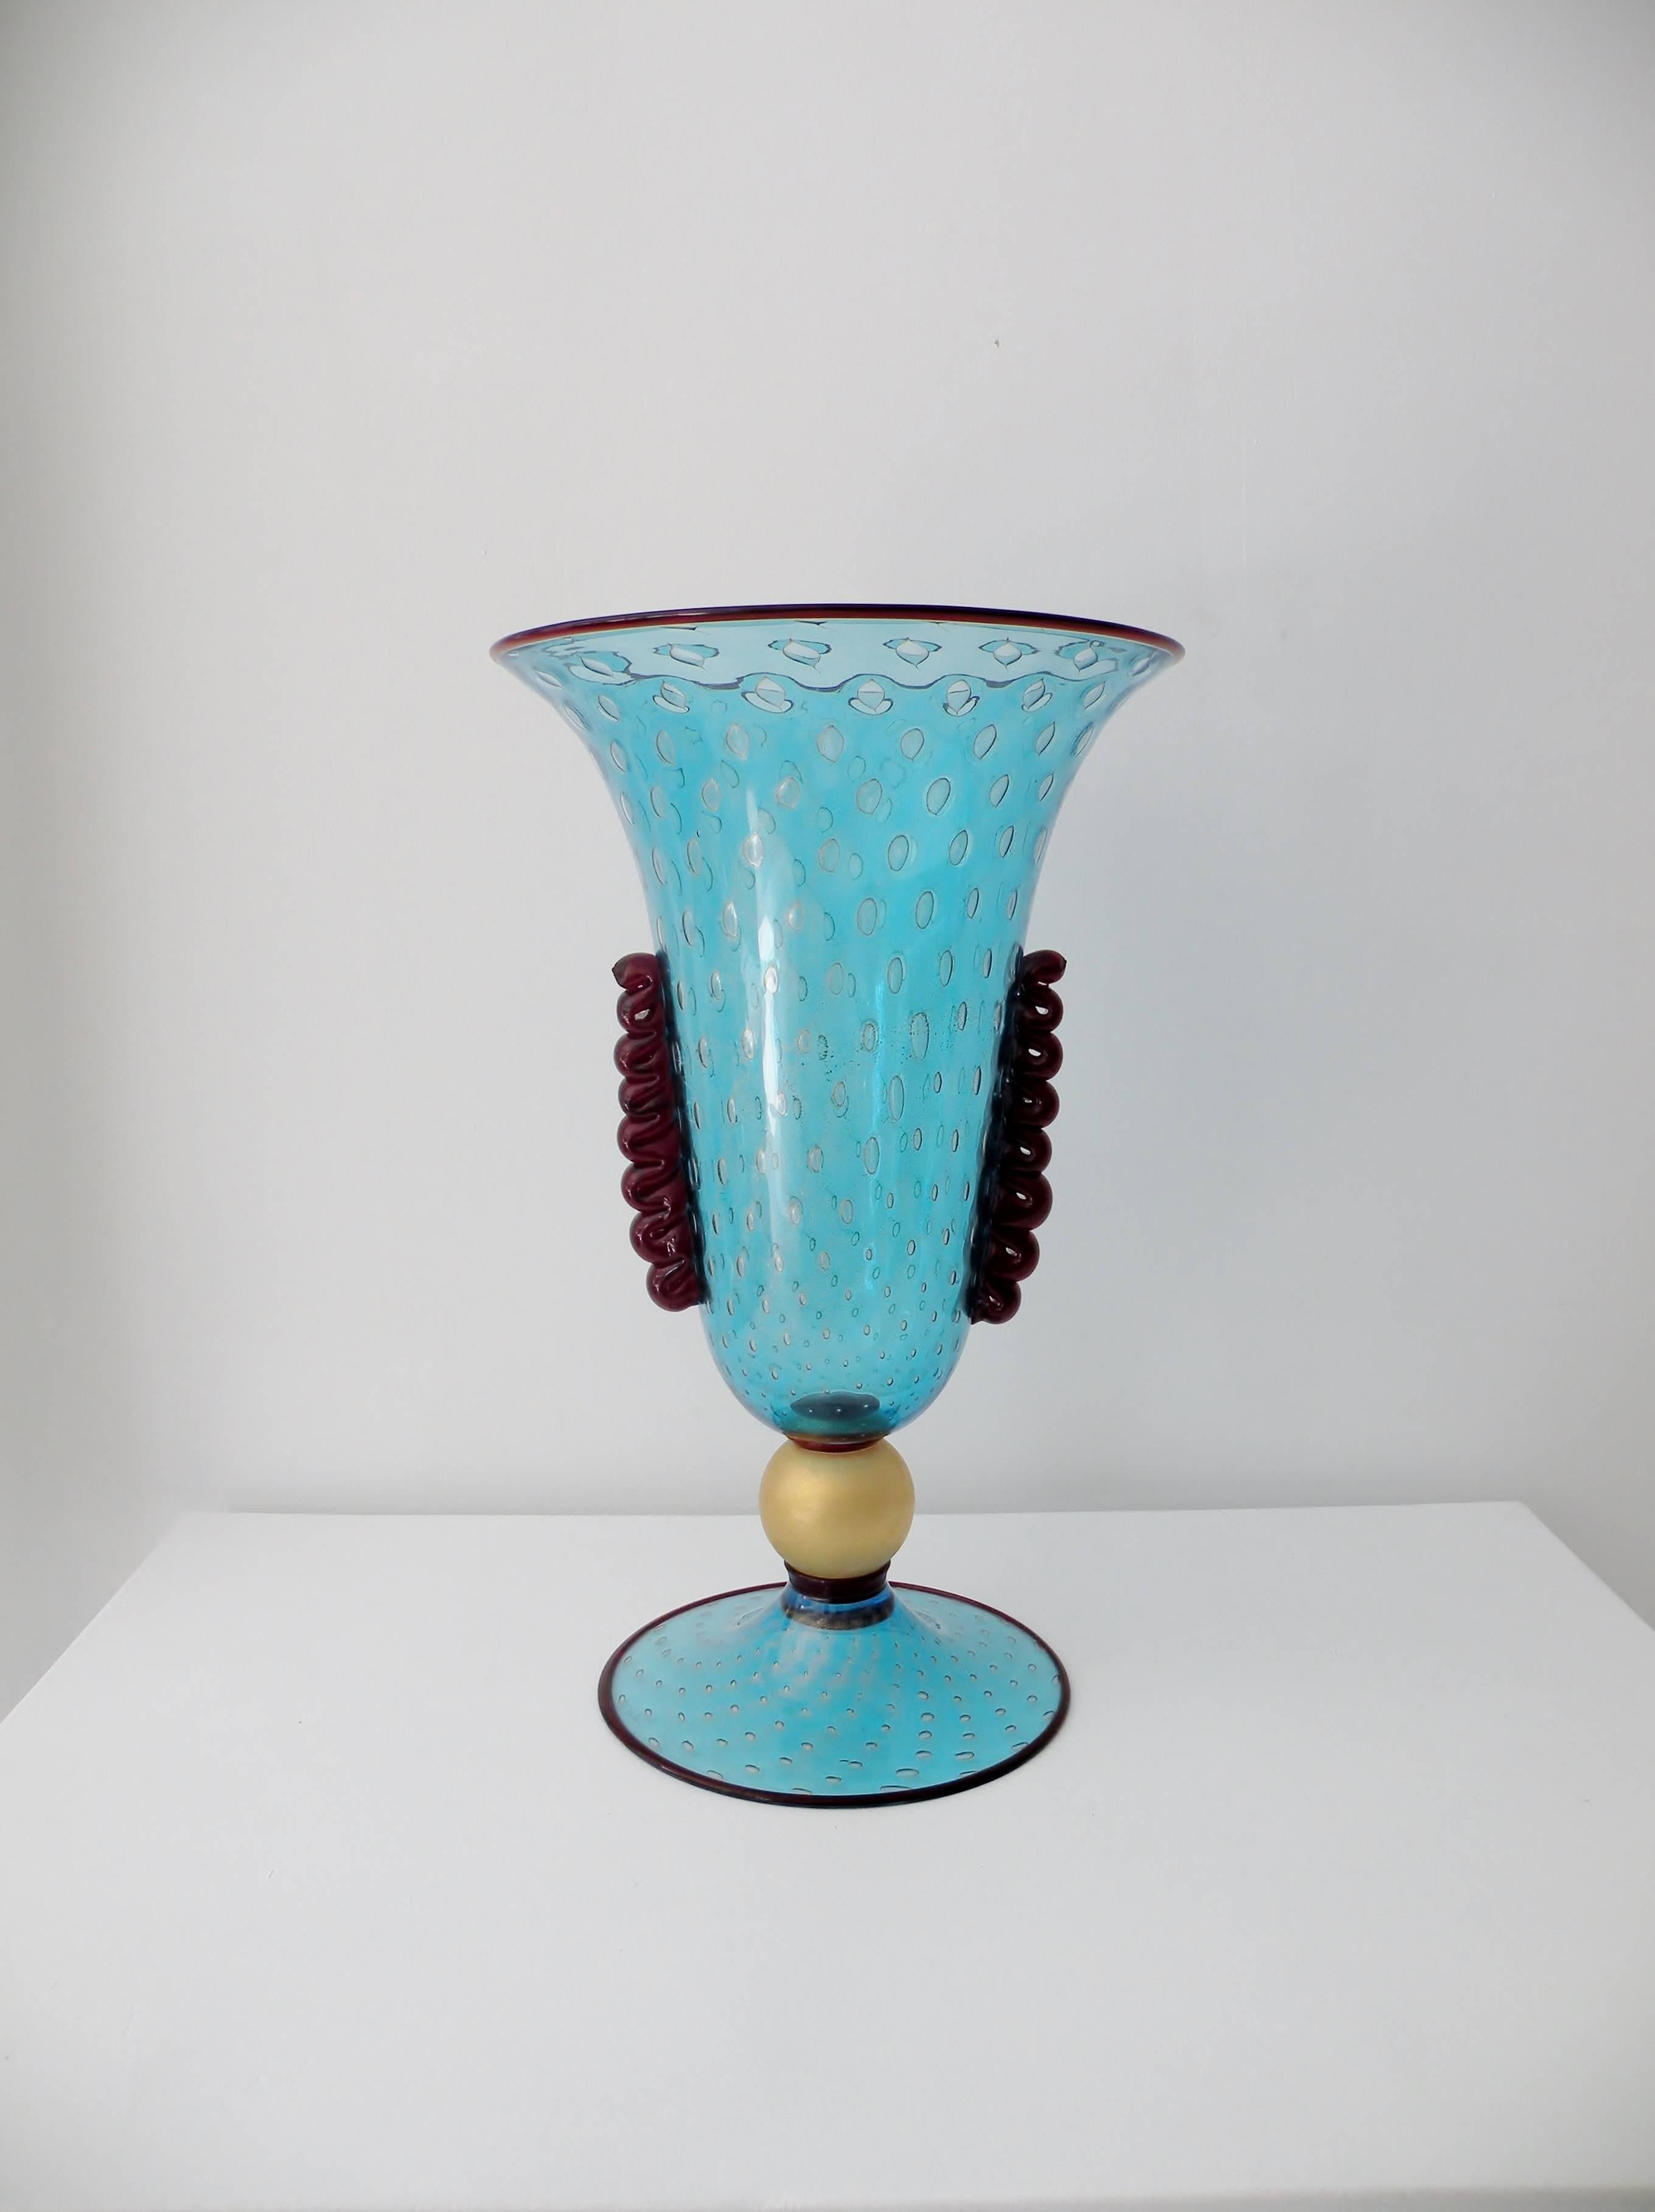 Outstanding monumental fine thin walled trumpet form vase with a teal blue body, Aventurina flecks and Bullicante controlled bubbles on a gold foil ball stem with ruby glass detailing to rims and sides. Approximate 17.75